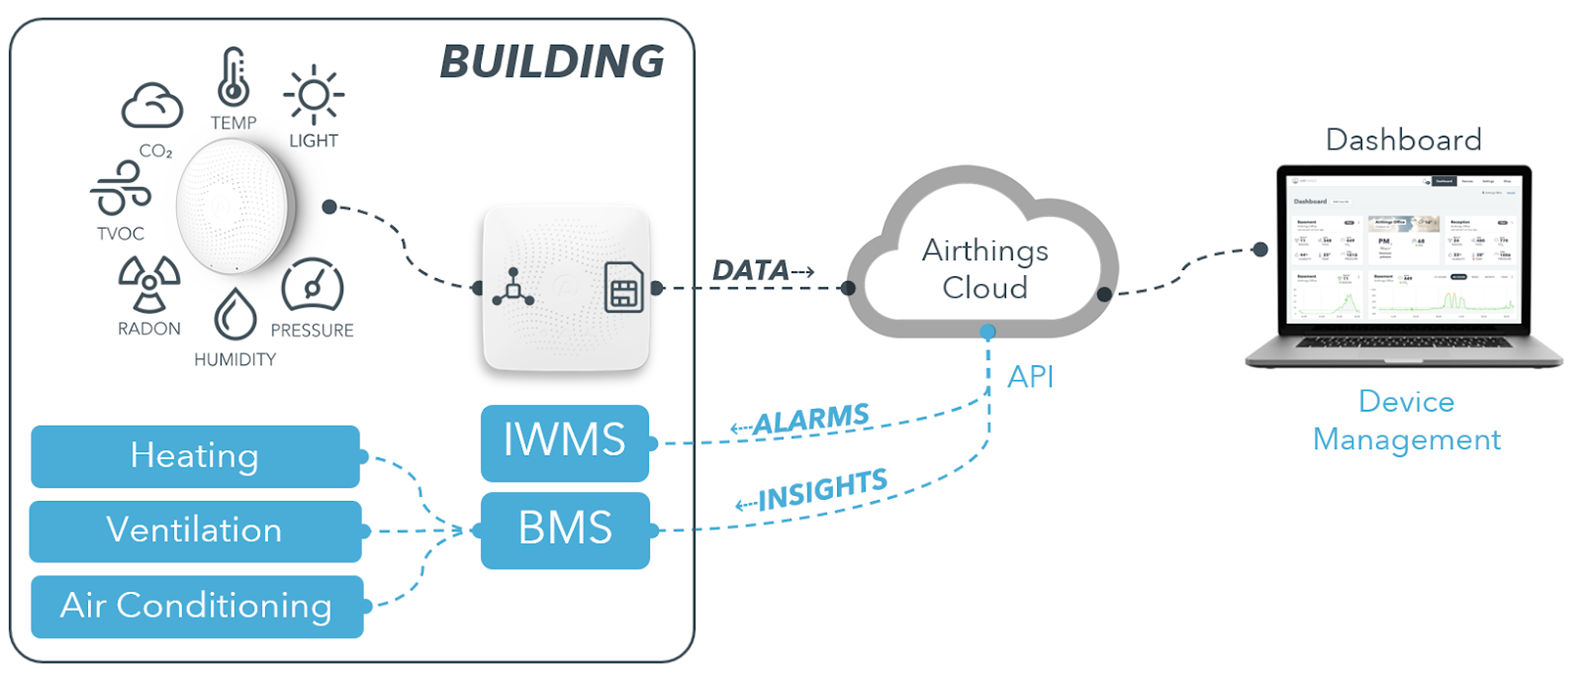 Getting started on Building Automation with Airthings